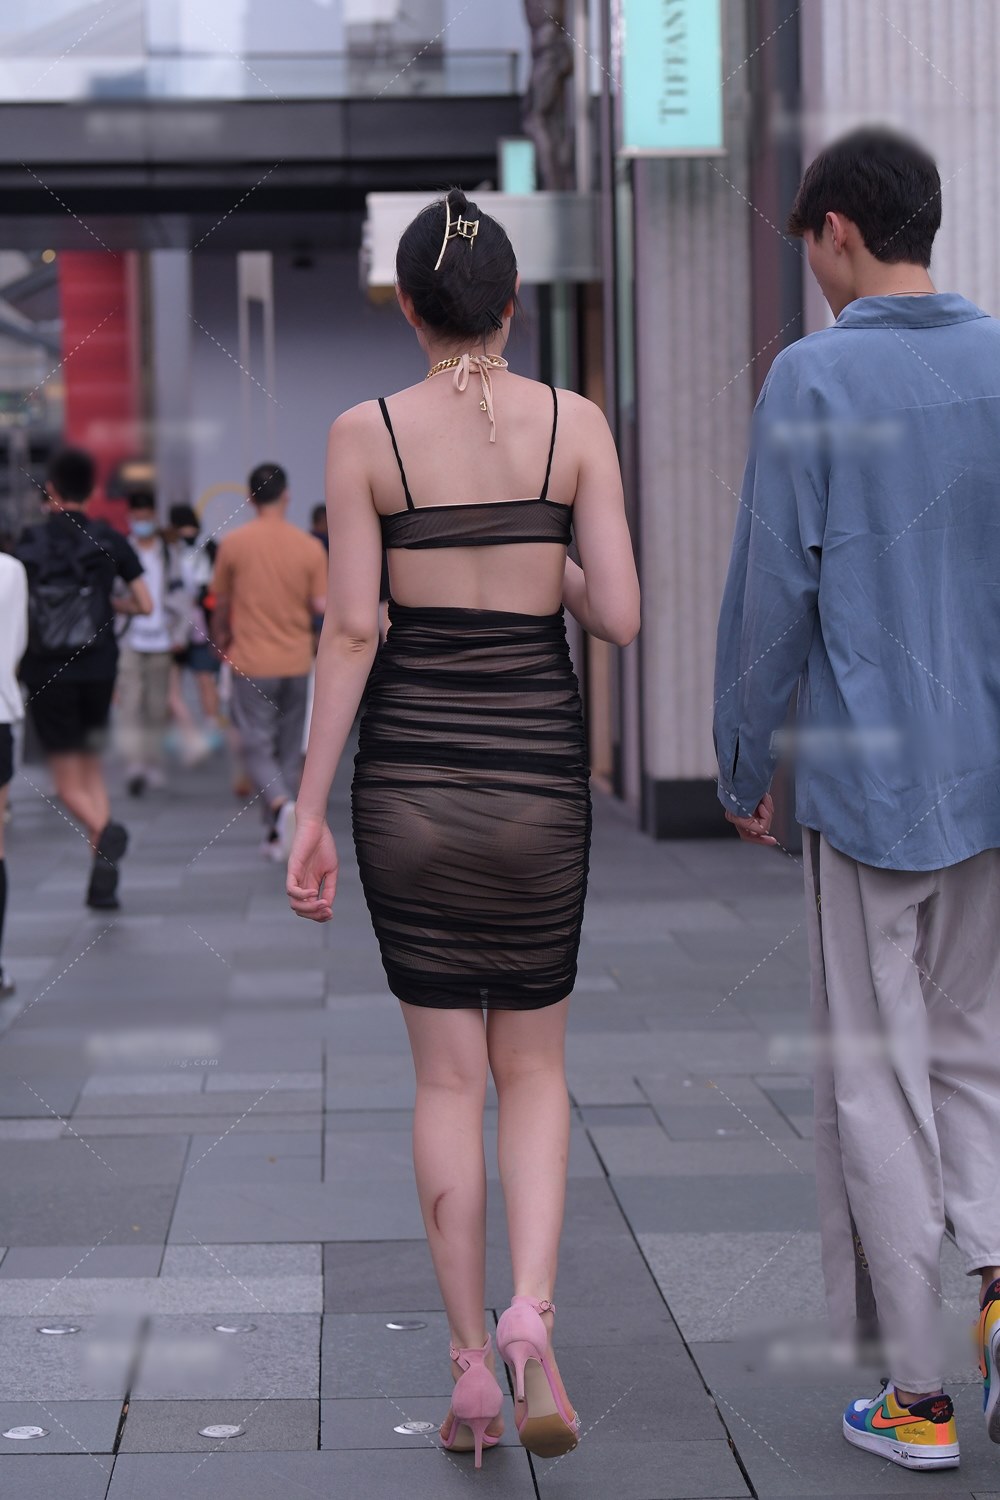 "Street beauty"  wearing a dress that is easy to see through is not very subtle - 3